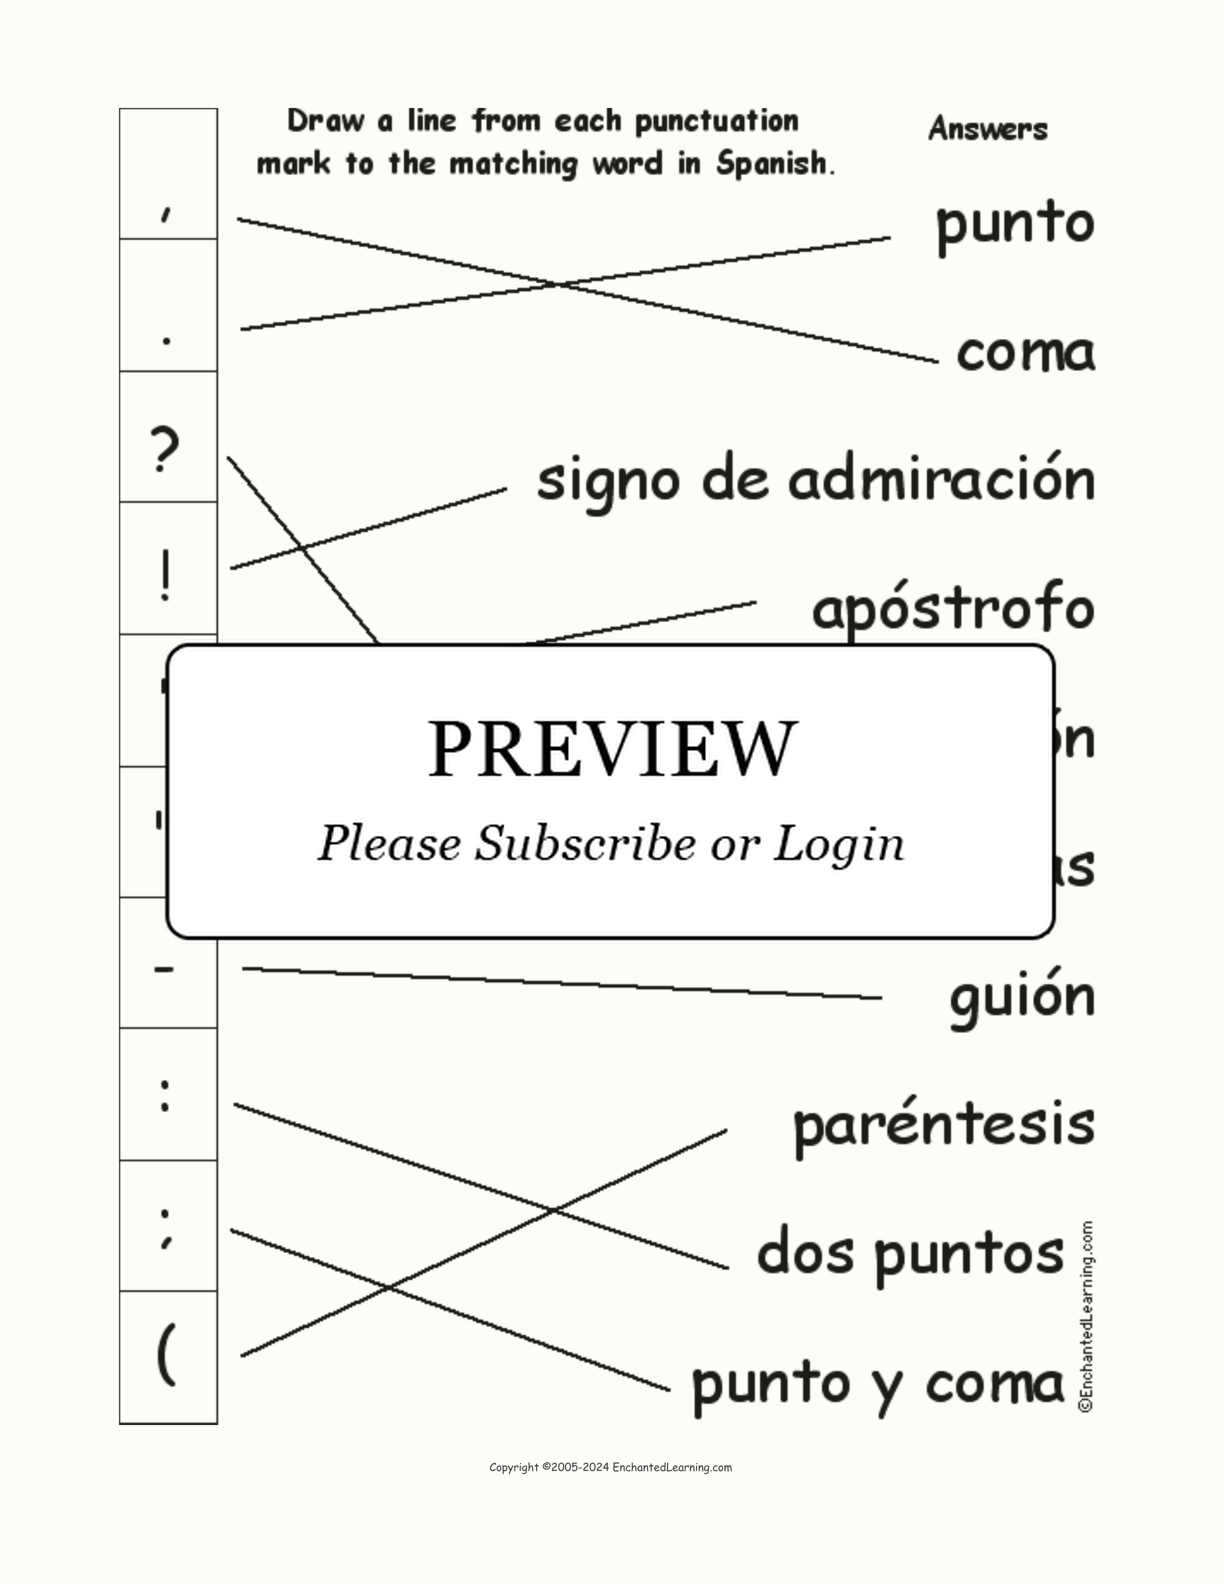 Match Spanish Punctuation Marks to the Pictures interactive worksheet page 2